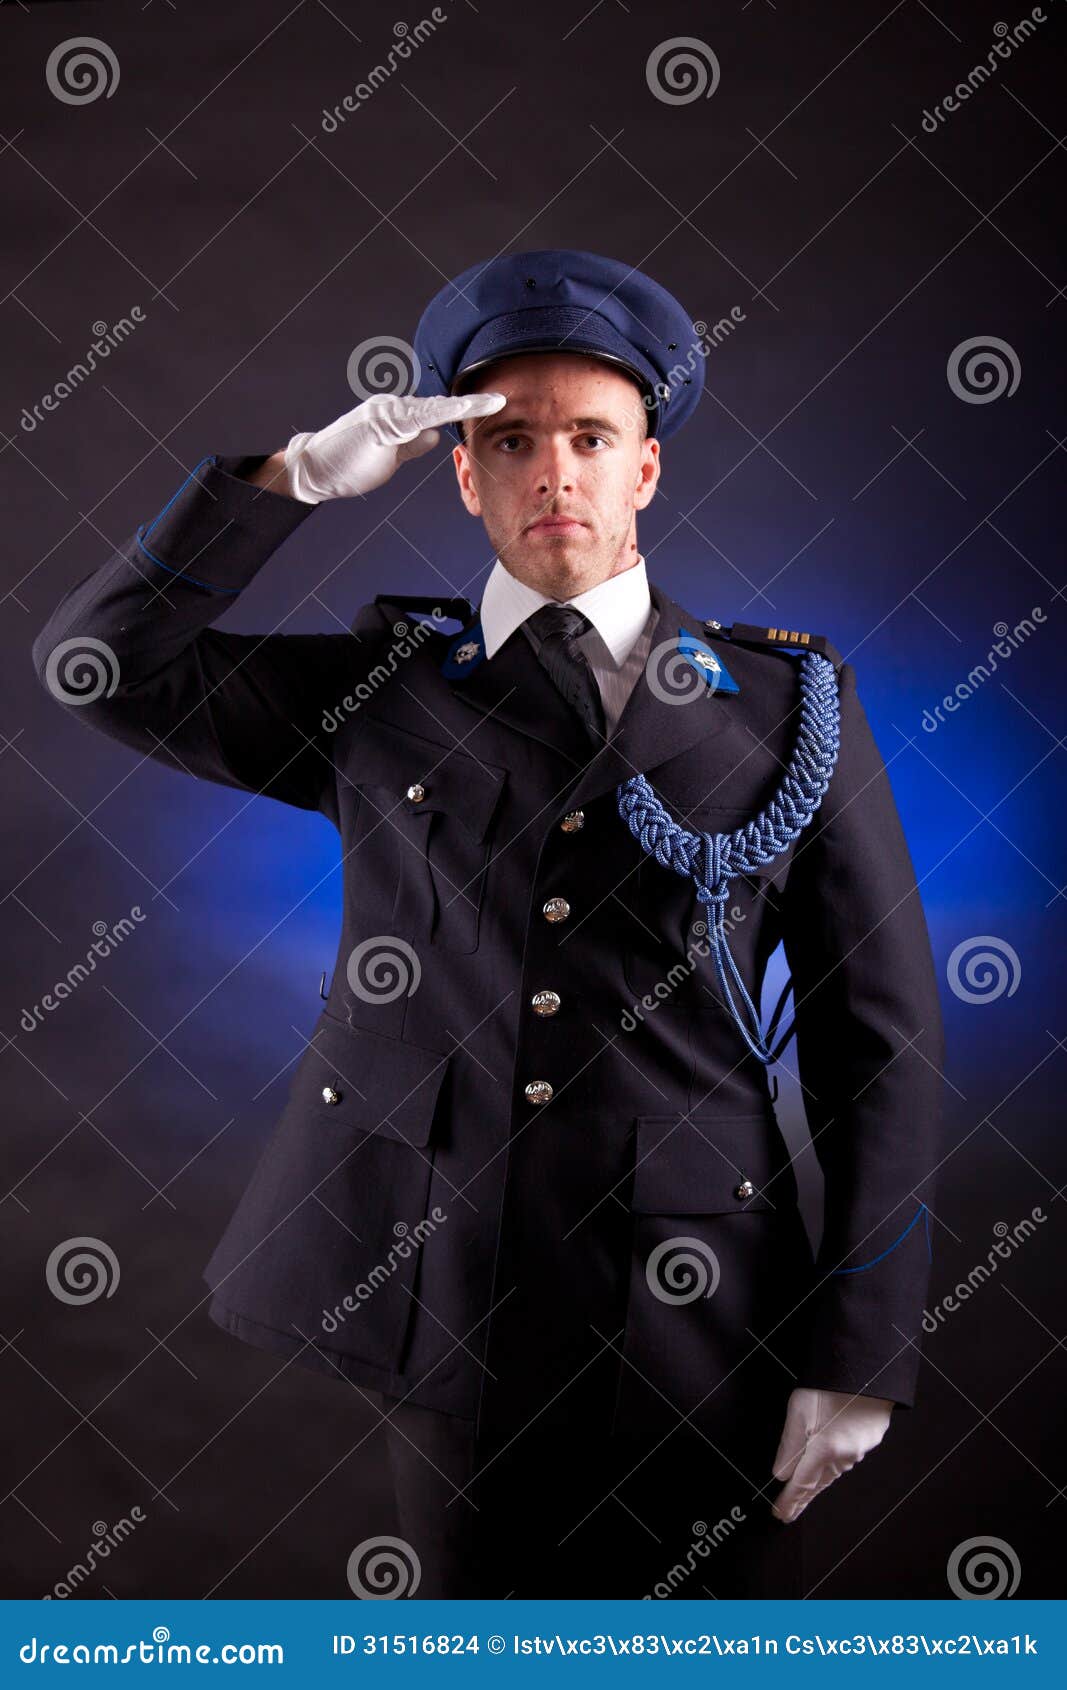 Elegant Soldier Wearing Uniform Stock Photo - Image of official ...